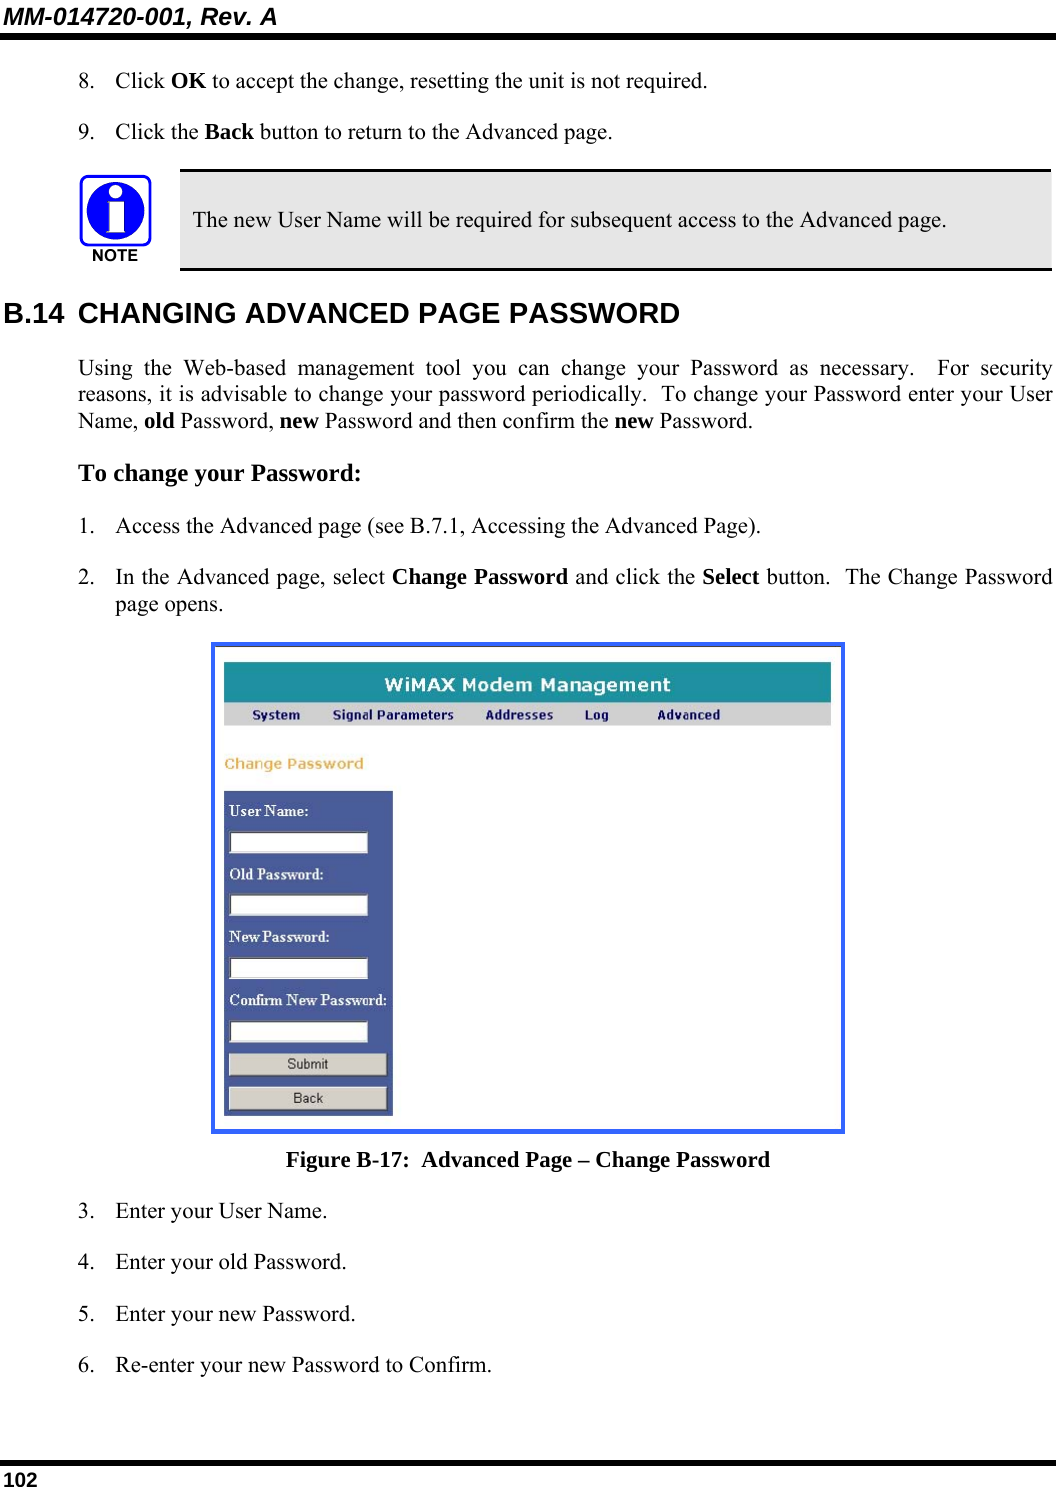 MM-014720-001, Rev. A 102 8. Click OK to accept the change, resetting the unit is not required. 9. Click the Back button to return to the Advanced page.   The new User Name will be required for subsequent access to the Advanced page. B.14  CHANGING ADVANCED PAGE PASSWORD Using the Web-based management tool you can change your Password as necessary.  For security reasons, it is advisable to change your password periodically.  To change your Password enter your User Name, old Password, new Password and then confirm the new Password.  To change your Password:  1. Access the Advanced page (see B.7.1, Accessing the Advanced Page).  2. In the Advanced page, select Change Password and click the Select button.  The Change Password page opens.   Figure B-17:  Advanced Page – Change Password 3. Enter your User Name. 4. Enter your old Password. 5. Enter your new Password. 6. Re-enter your new Password to Confirm. 